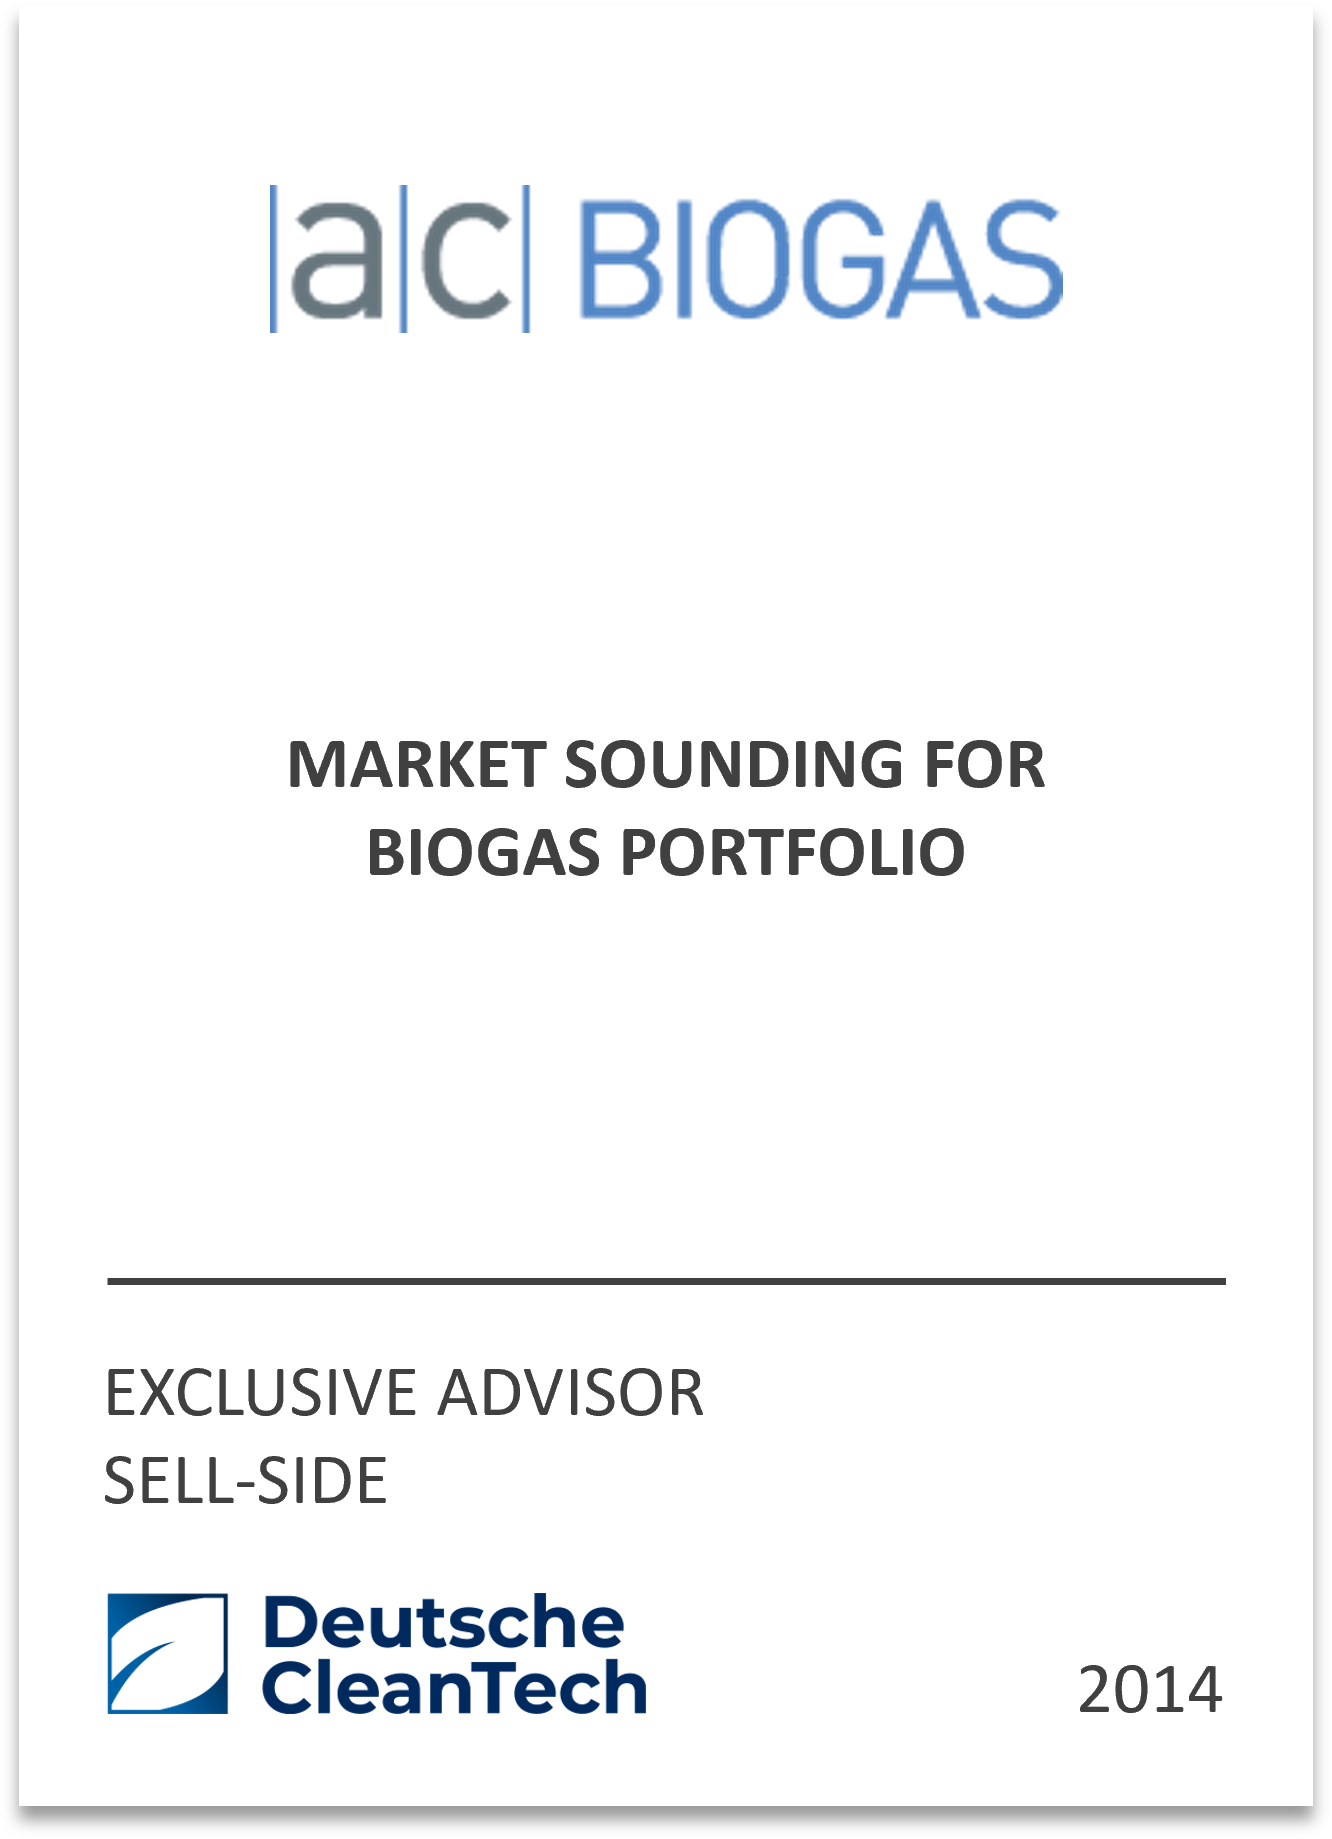 D.CT has conducted a marketability analysis for a portfolio of insolvent biogas facilities as part of a structured investor process